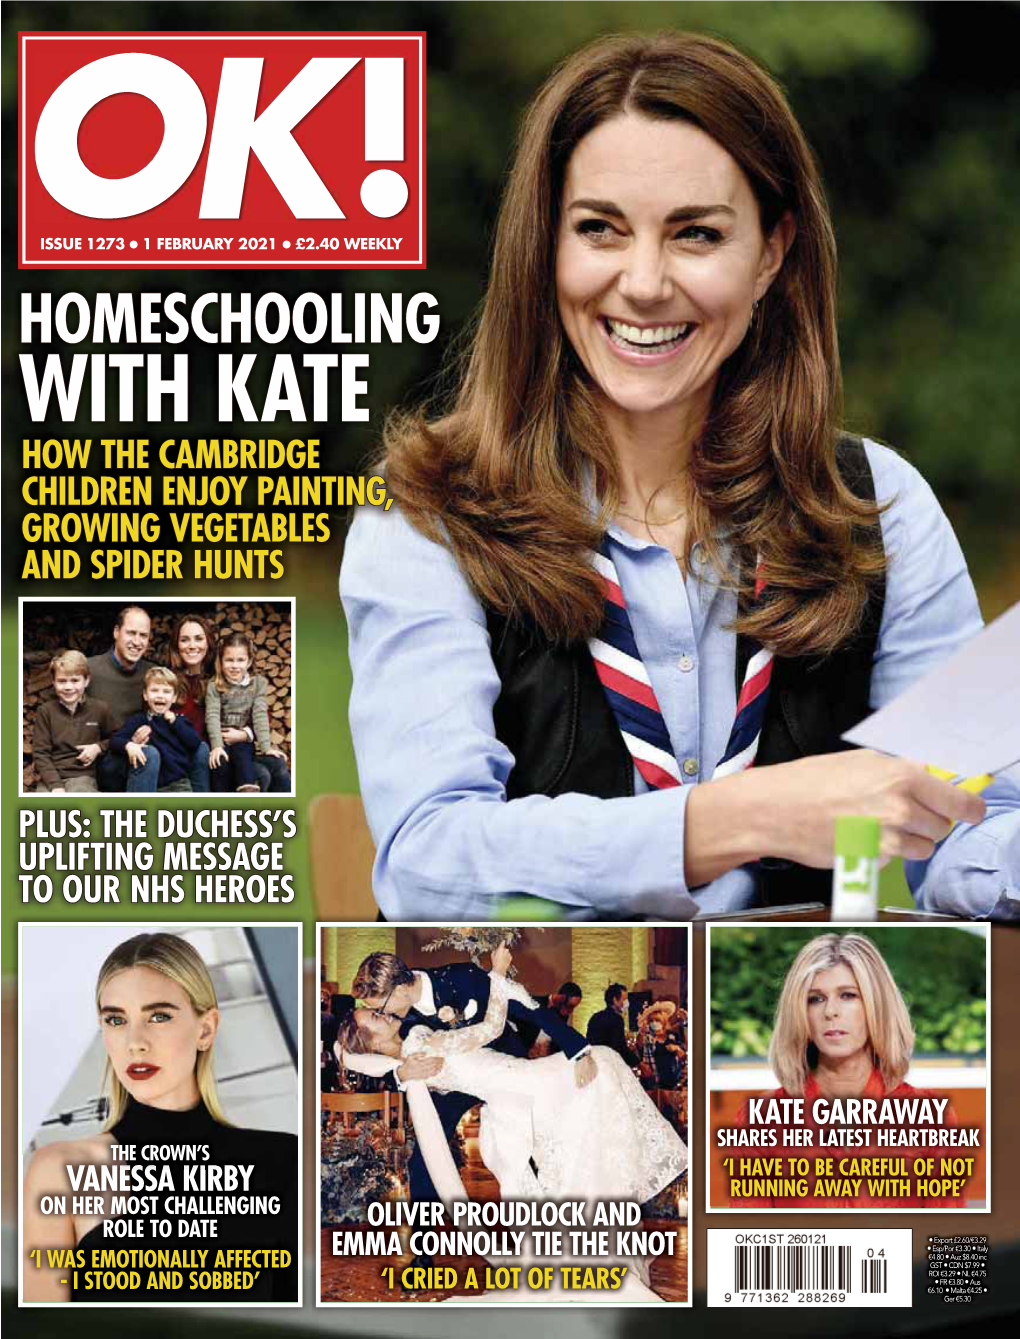 With Kate How the Cambridge Children Enjoy Painting, Growing Vegetables and Spider Hunts